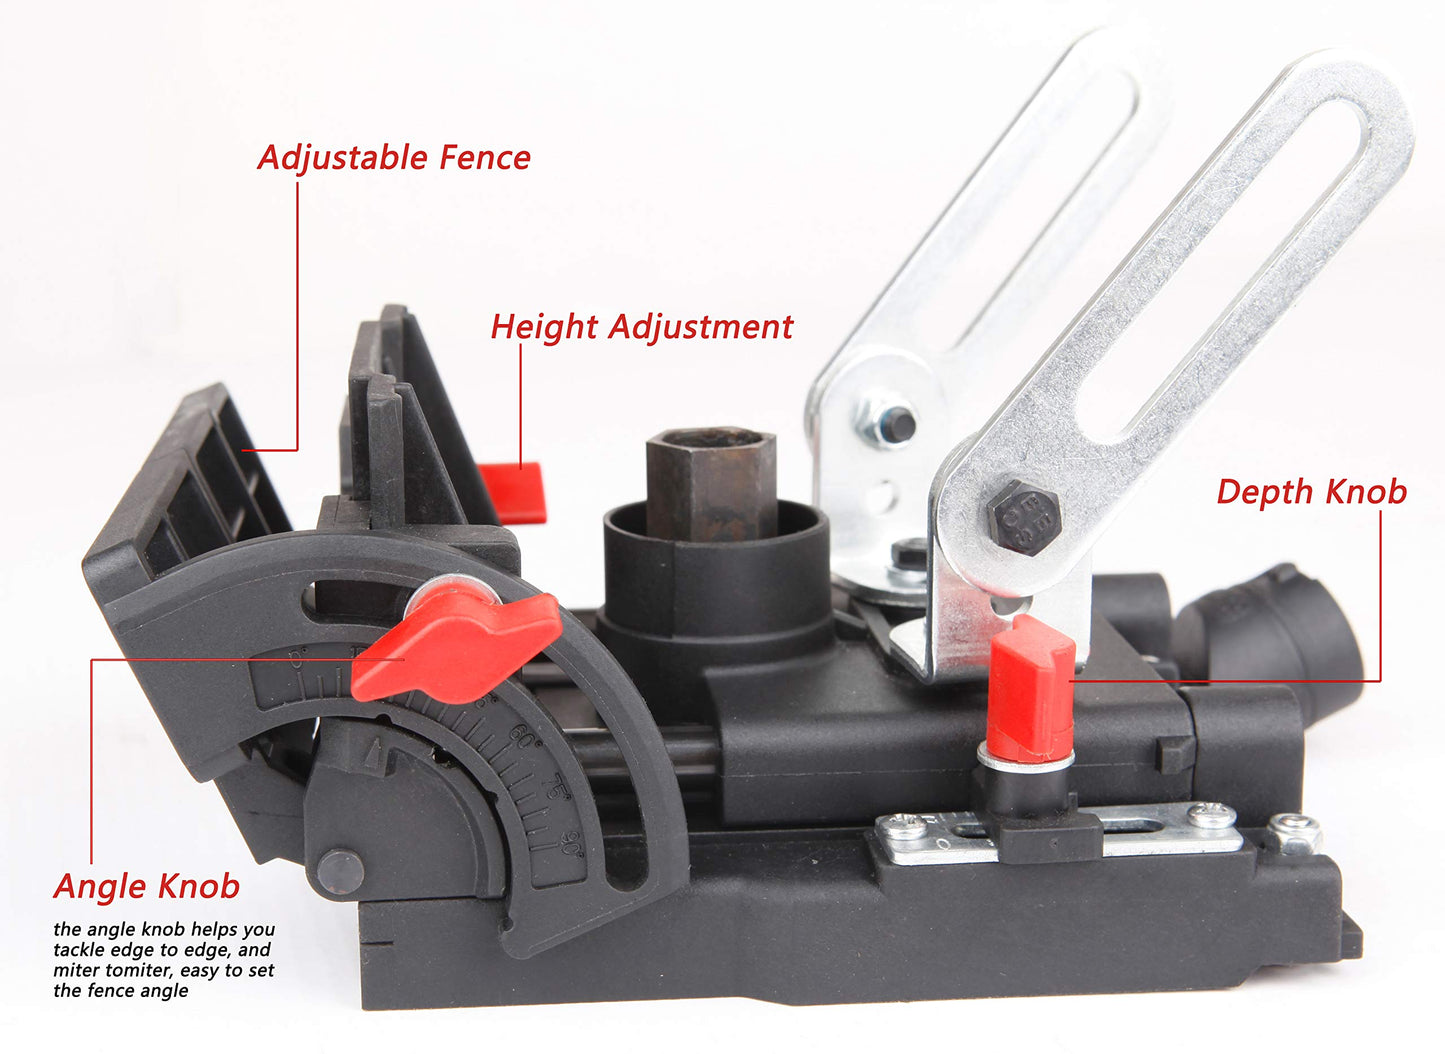 Dastool Biscuit Plate Joiner kit Accessories with 1x4" Blade,Adjustable Angle